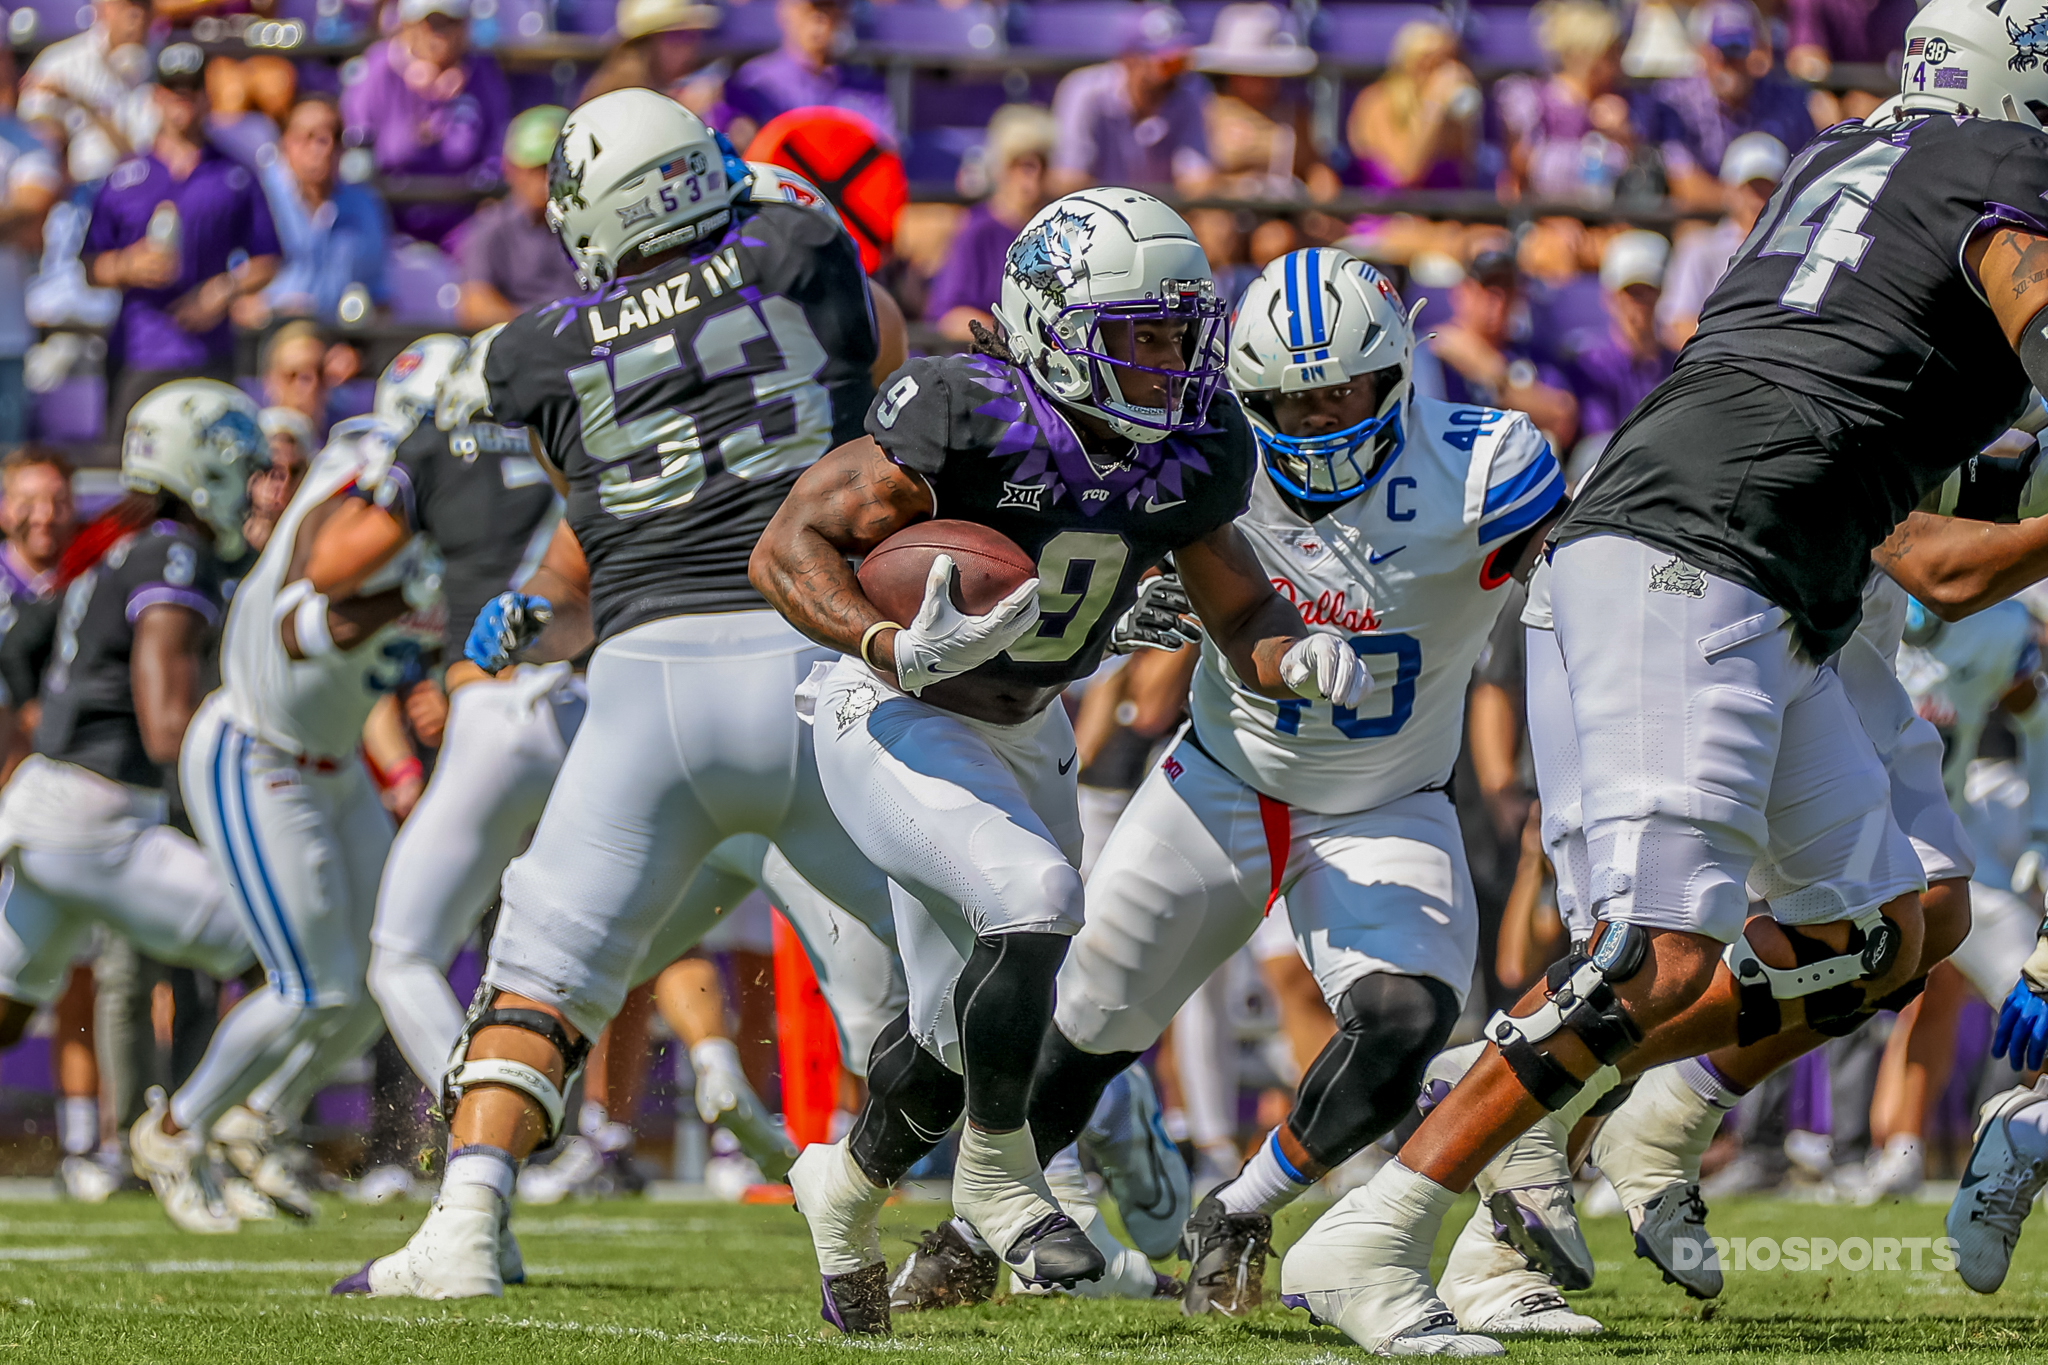 Mustangs Travel To No. 25 TCU In Battle For The Iron Skillet